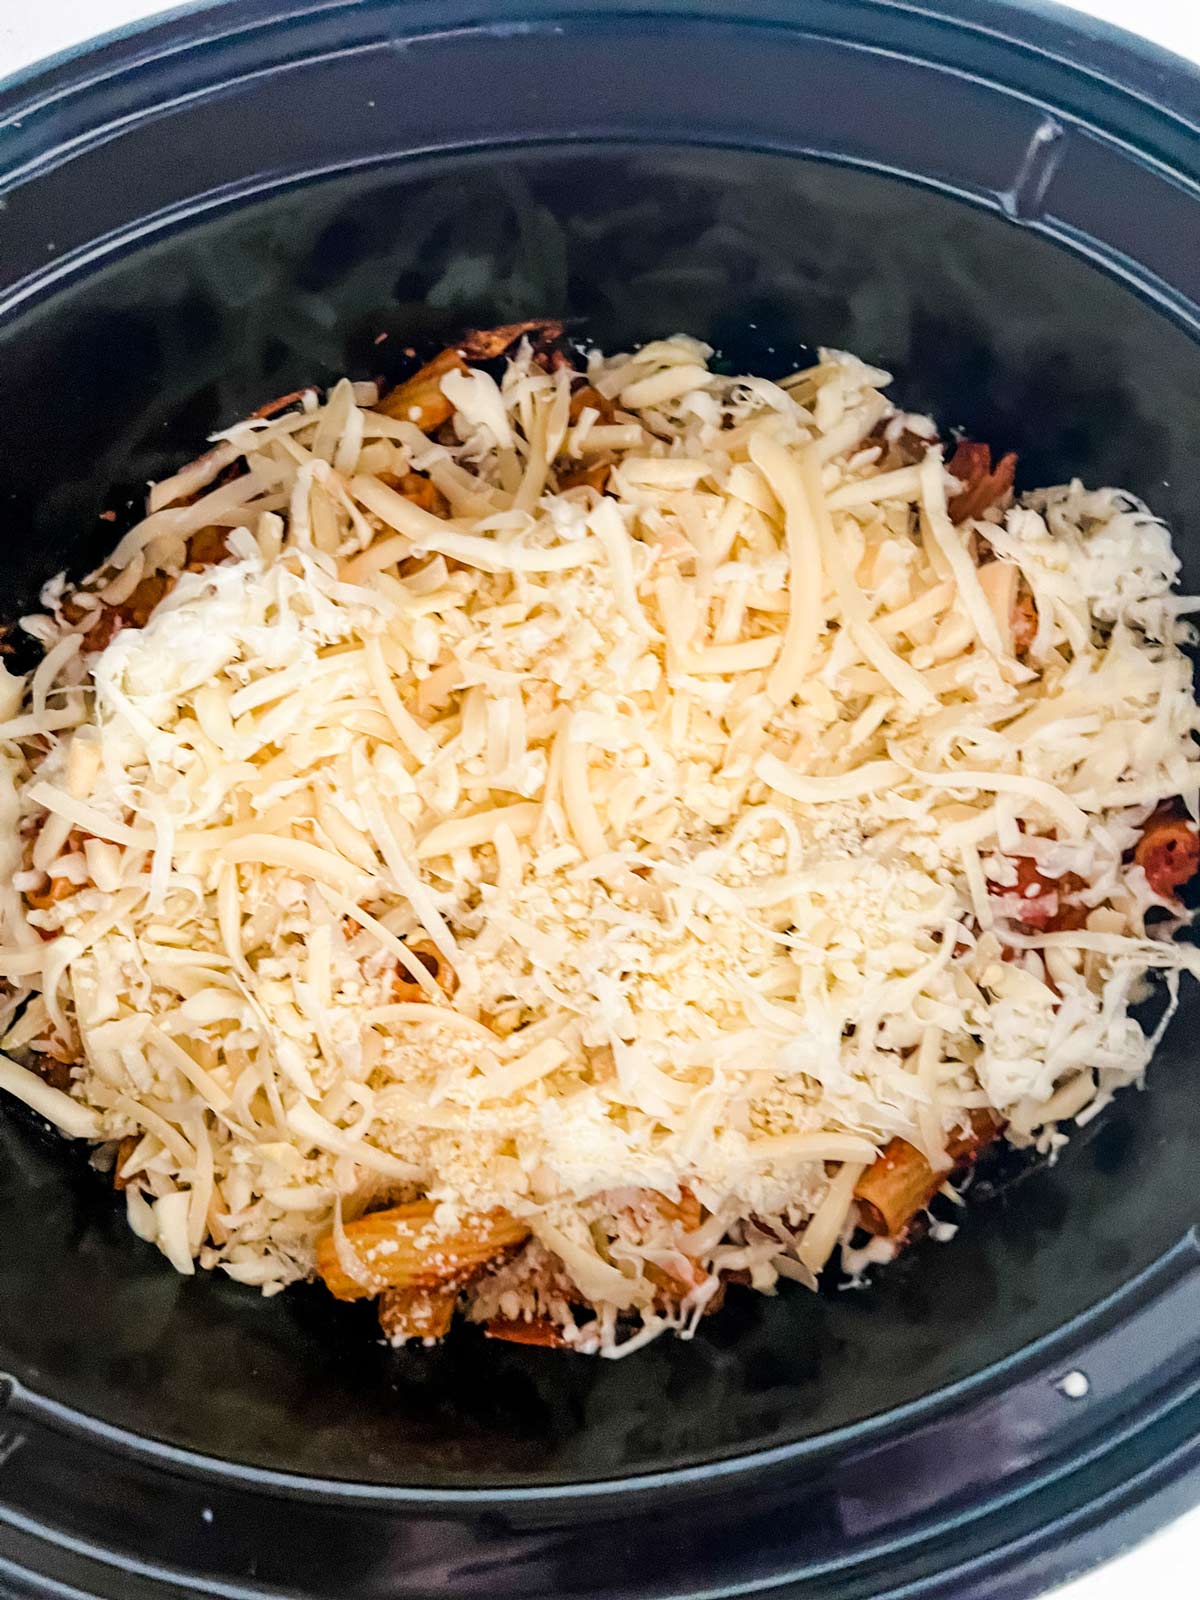 Crockpot pizza casserole with cheese on top of it in a slow cooker ready to cook.